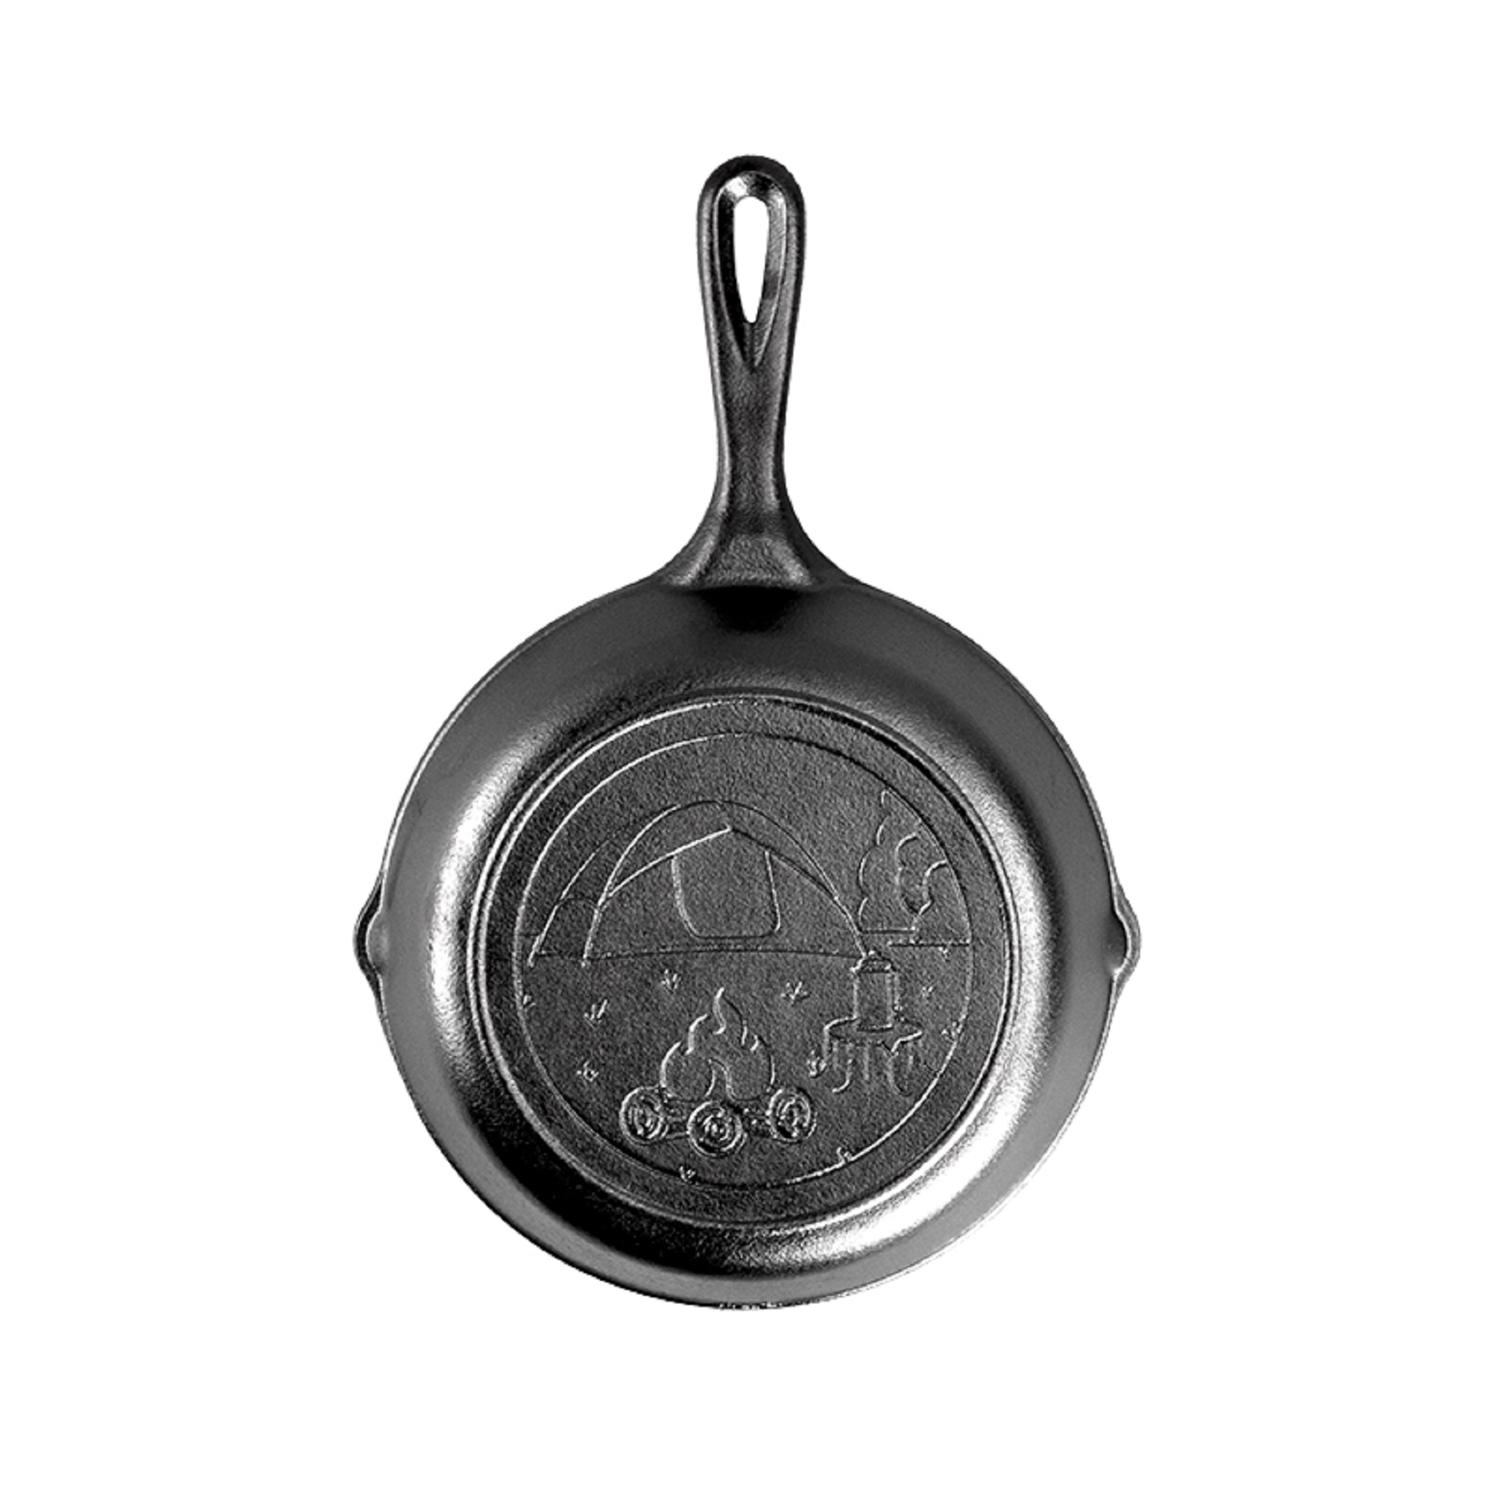 Photos - Other Accessories Lodge Wanderlust Cast Iron Skillet 8 in. Black L5SKWND 